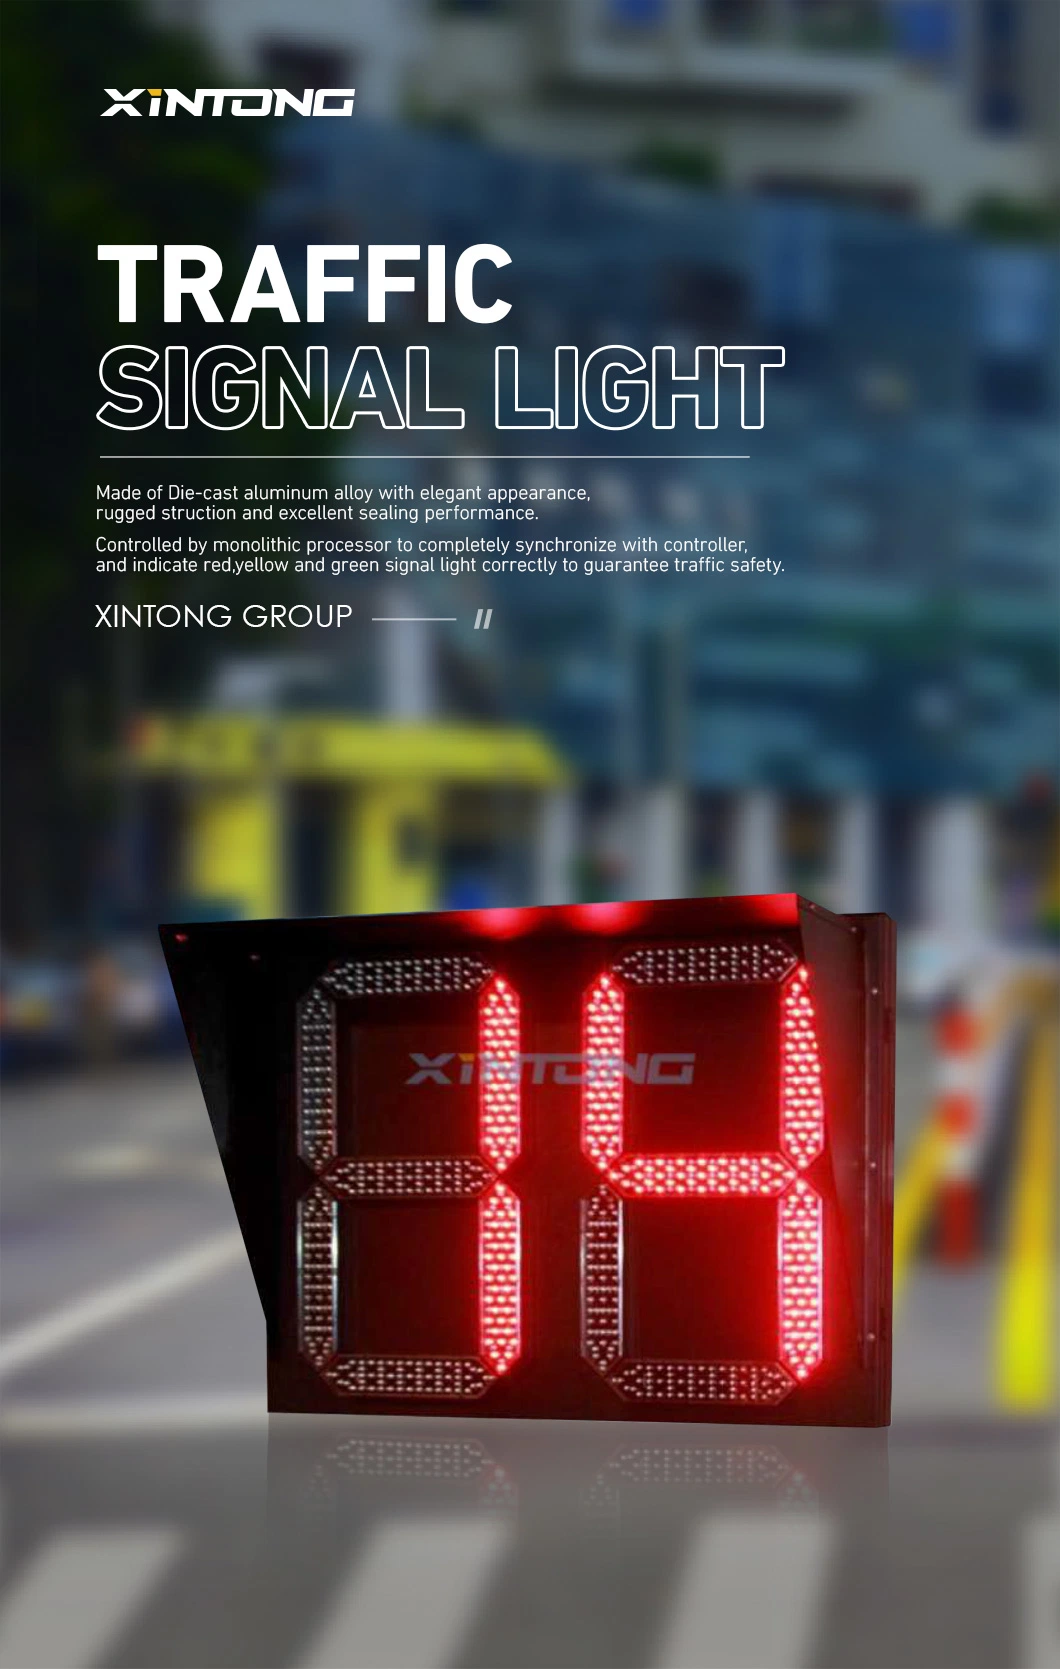 LED Red Road Warning Full Safety Barricade Solar Mobile Countdown Flashing Traffic Signal Light